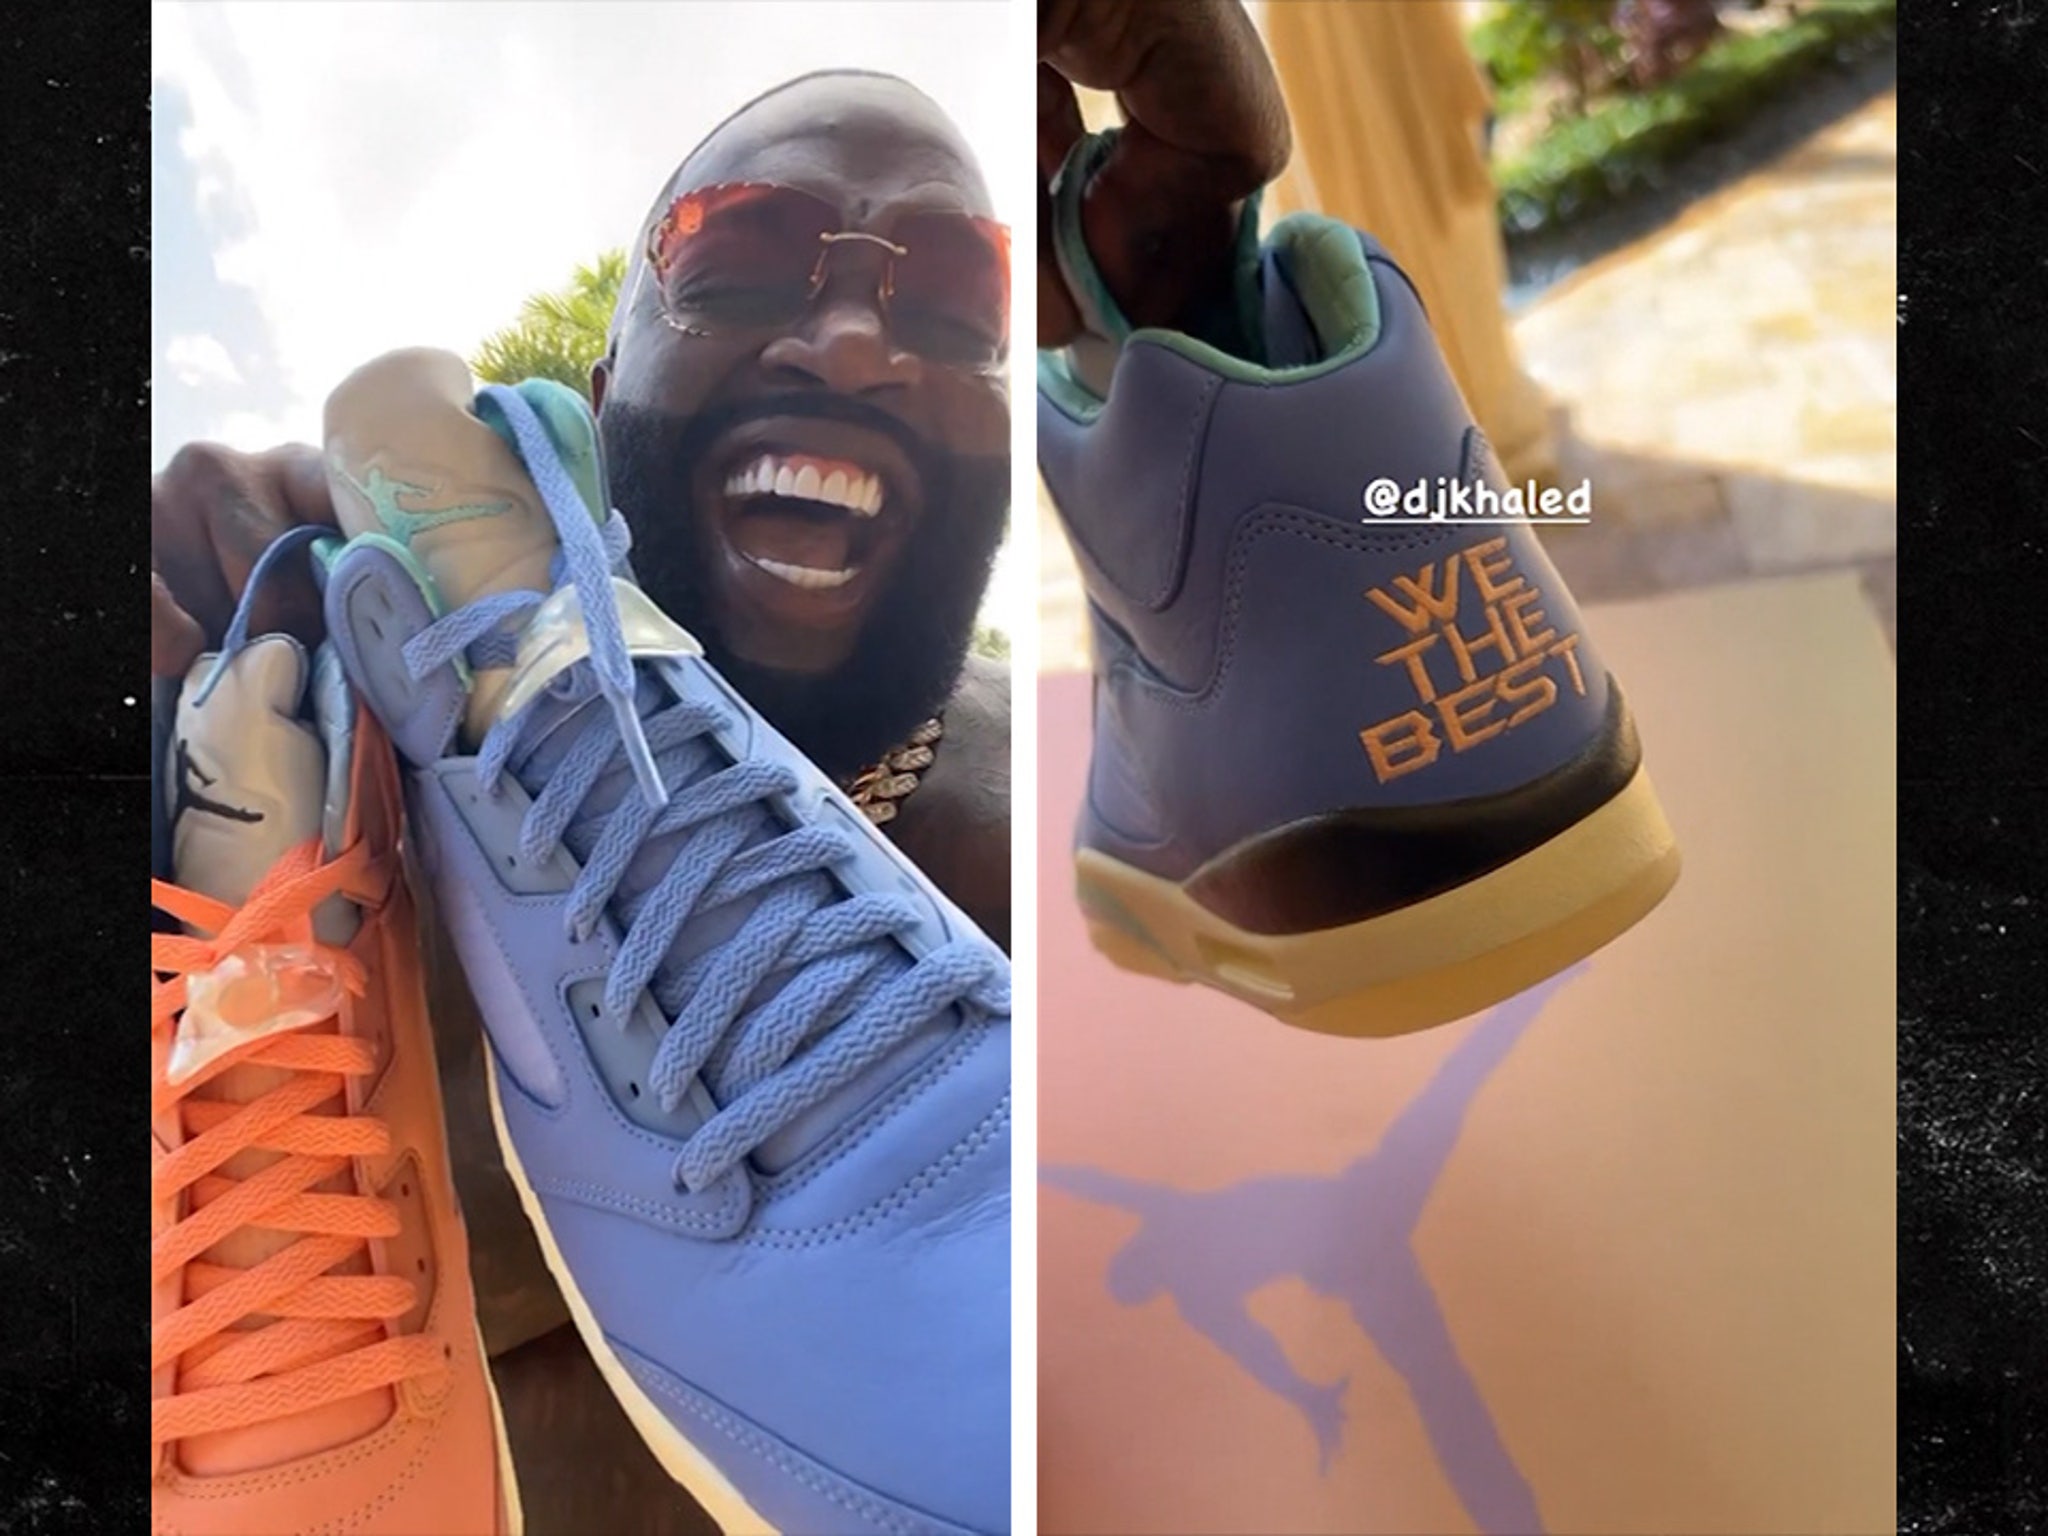 Another Look at DJ Khaled's We The Best x Air Jordan 5 Colab